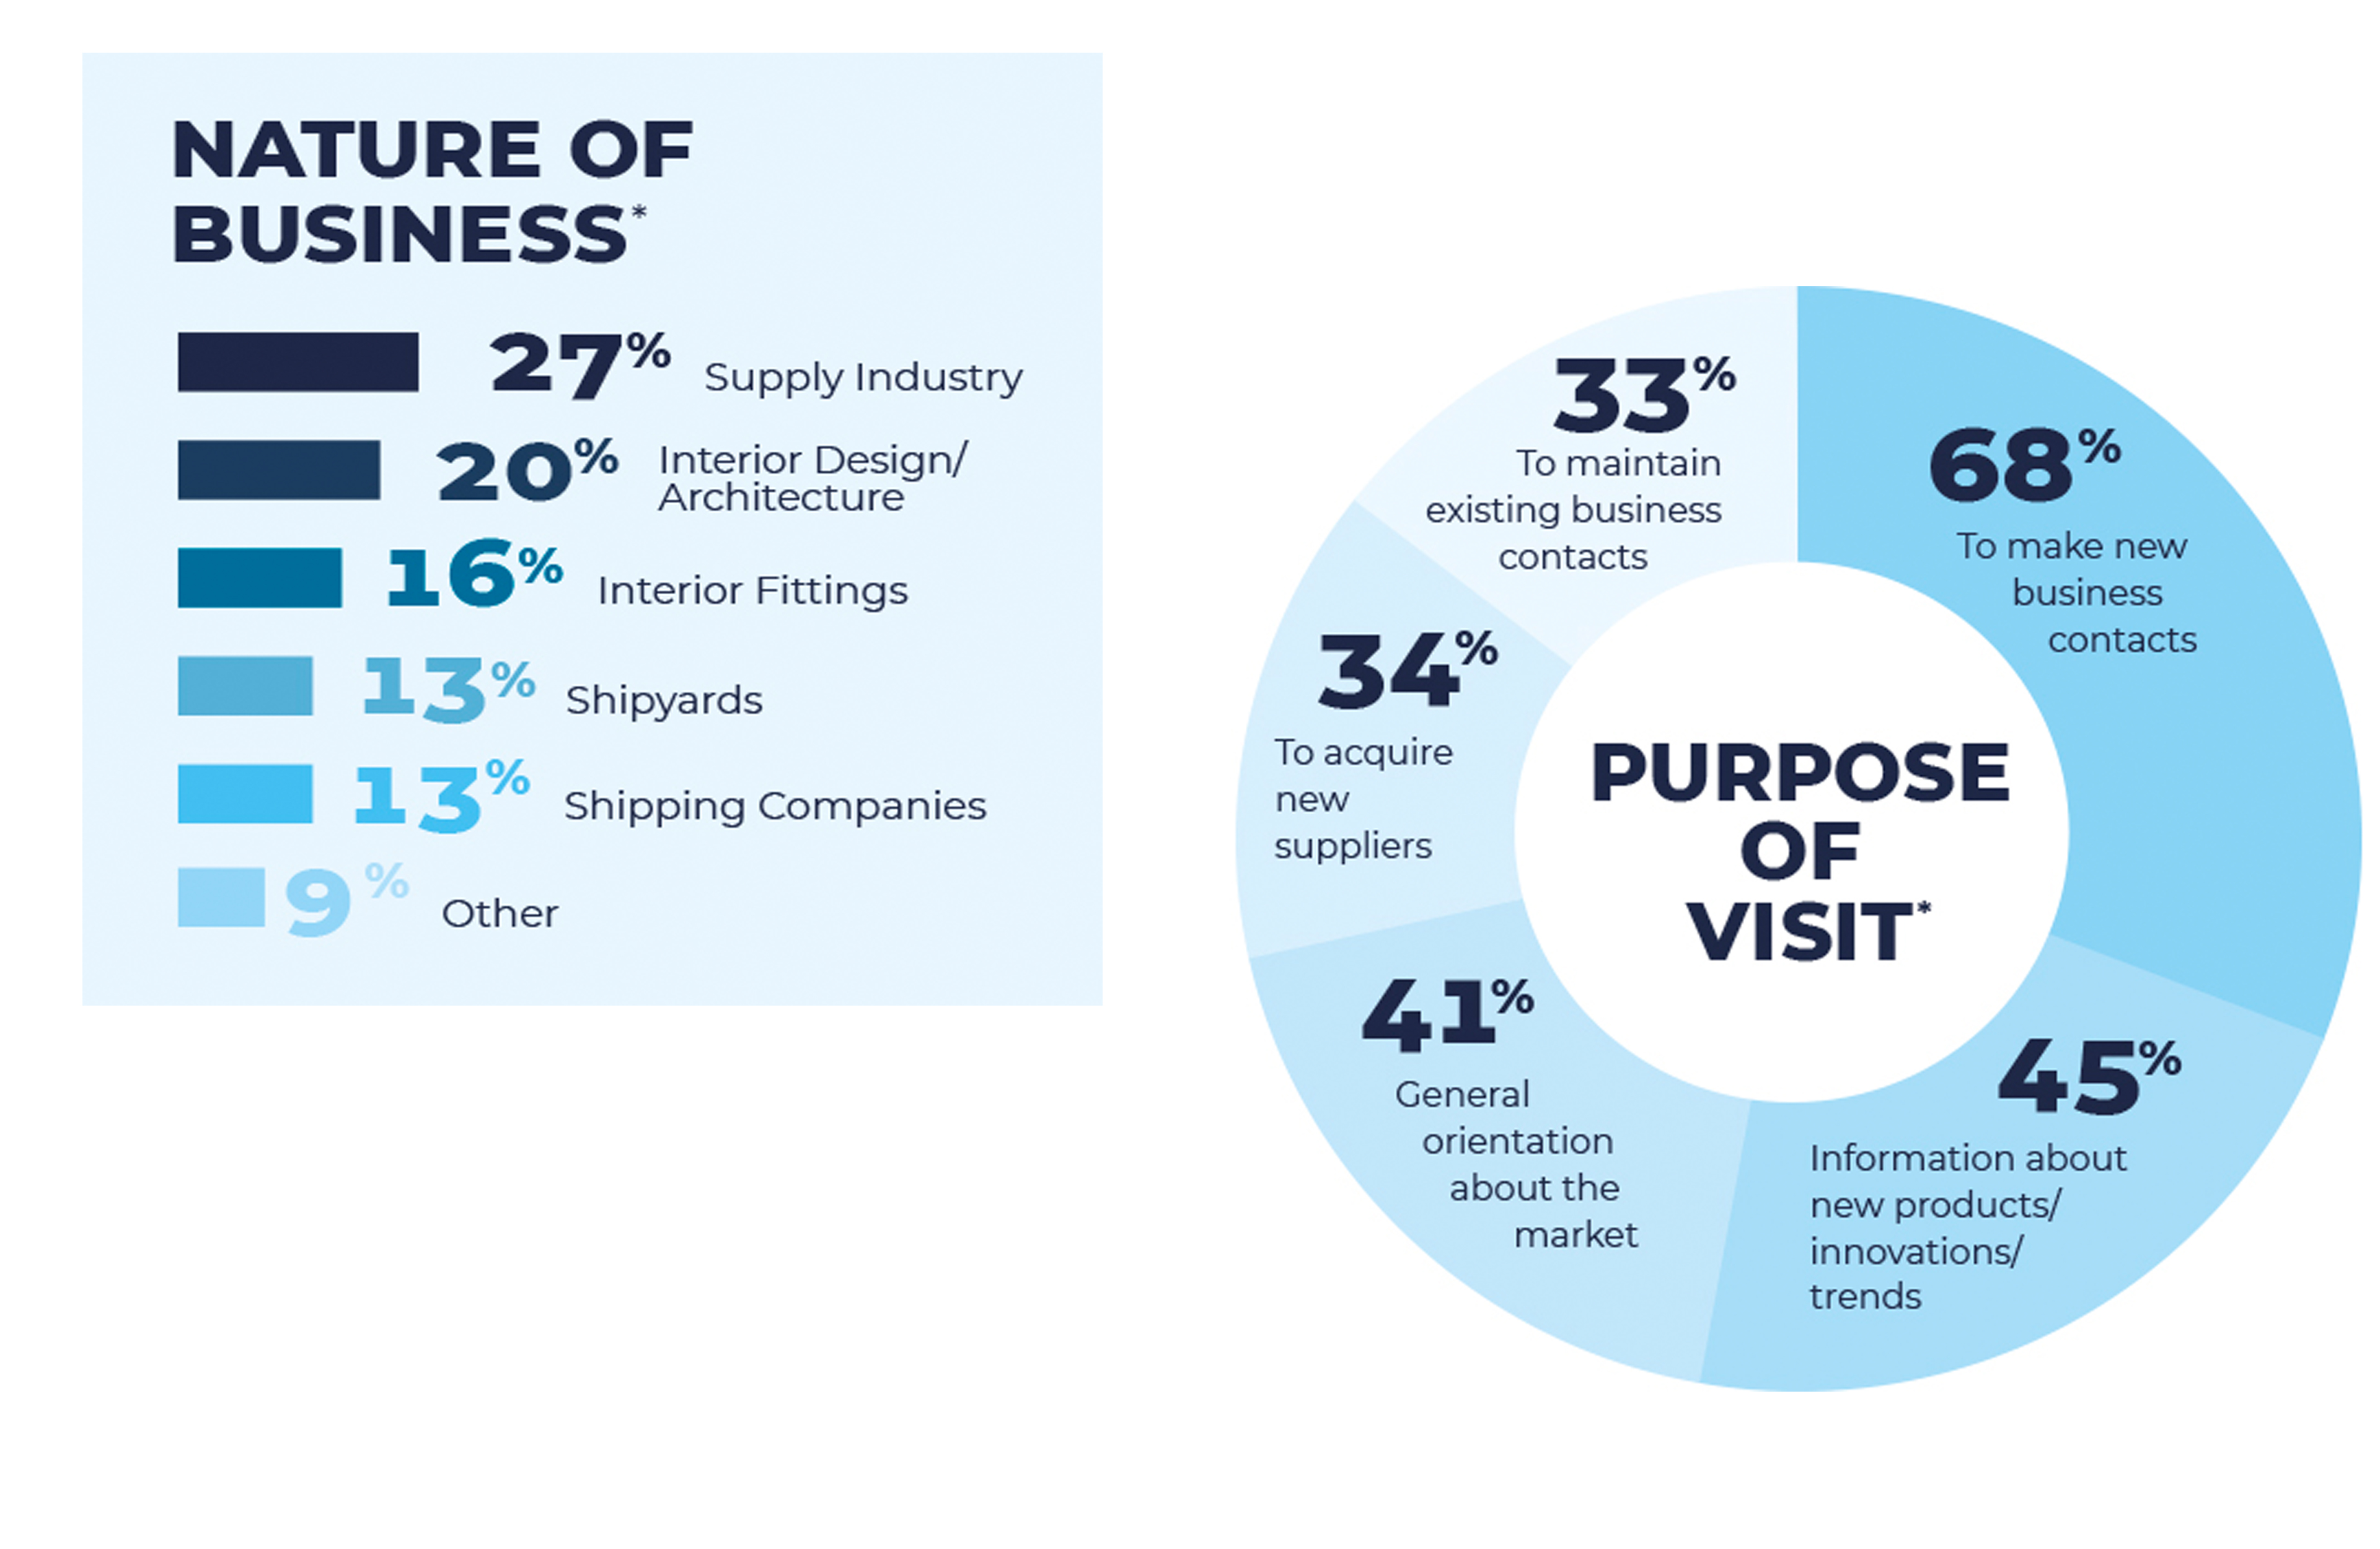 What is visitor´s purpose + nature of business?